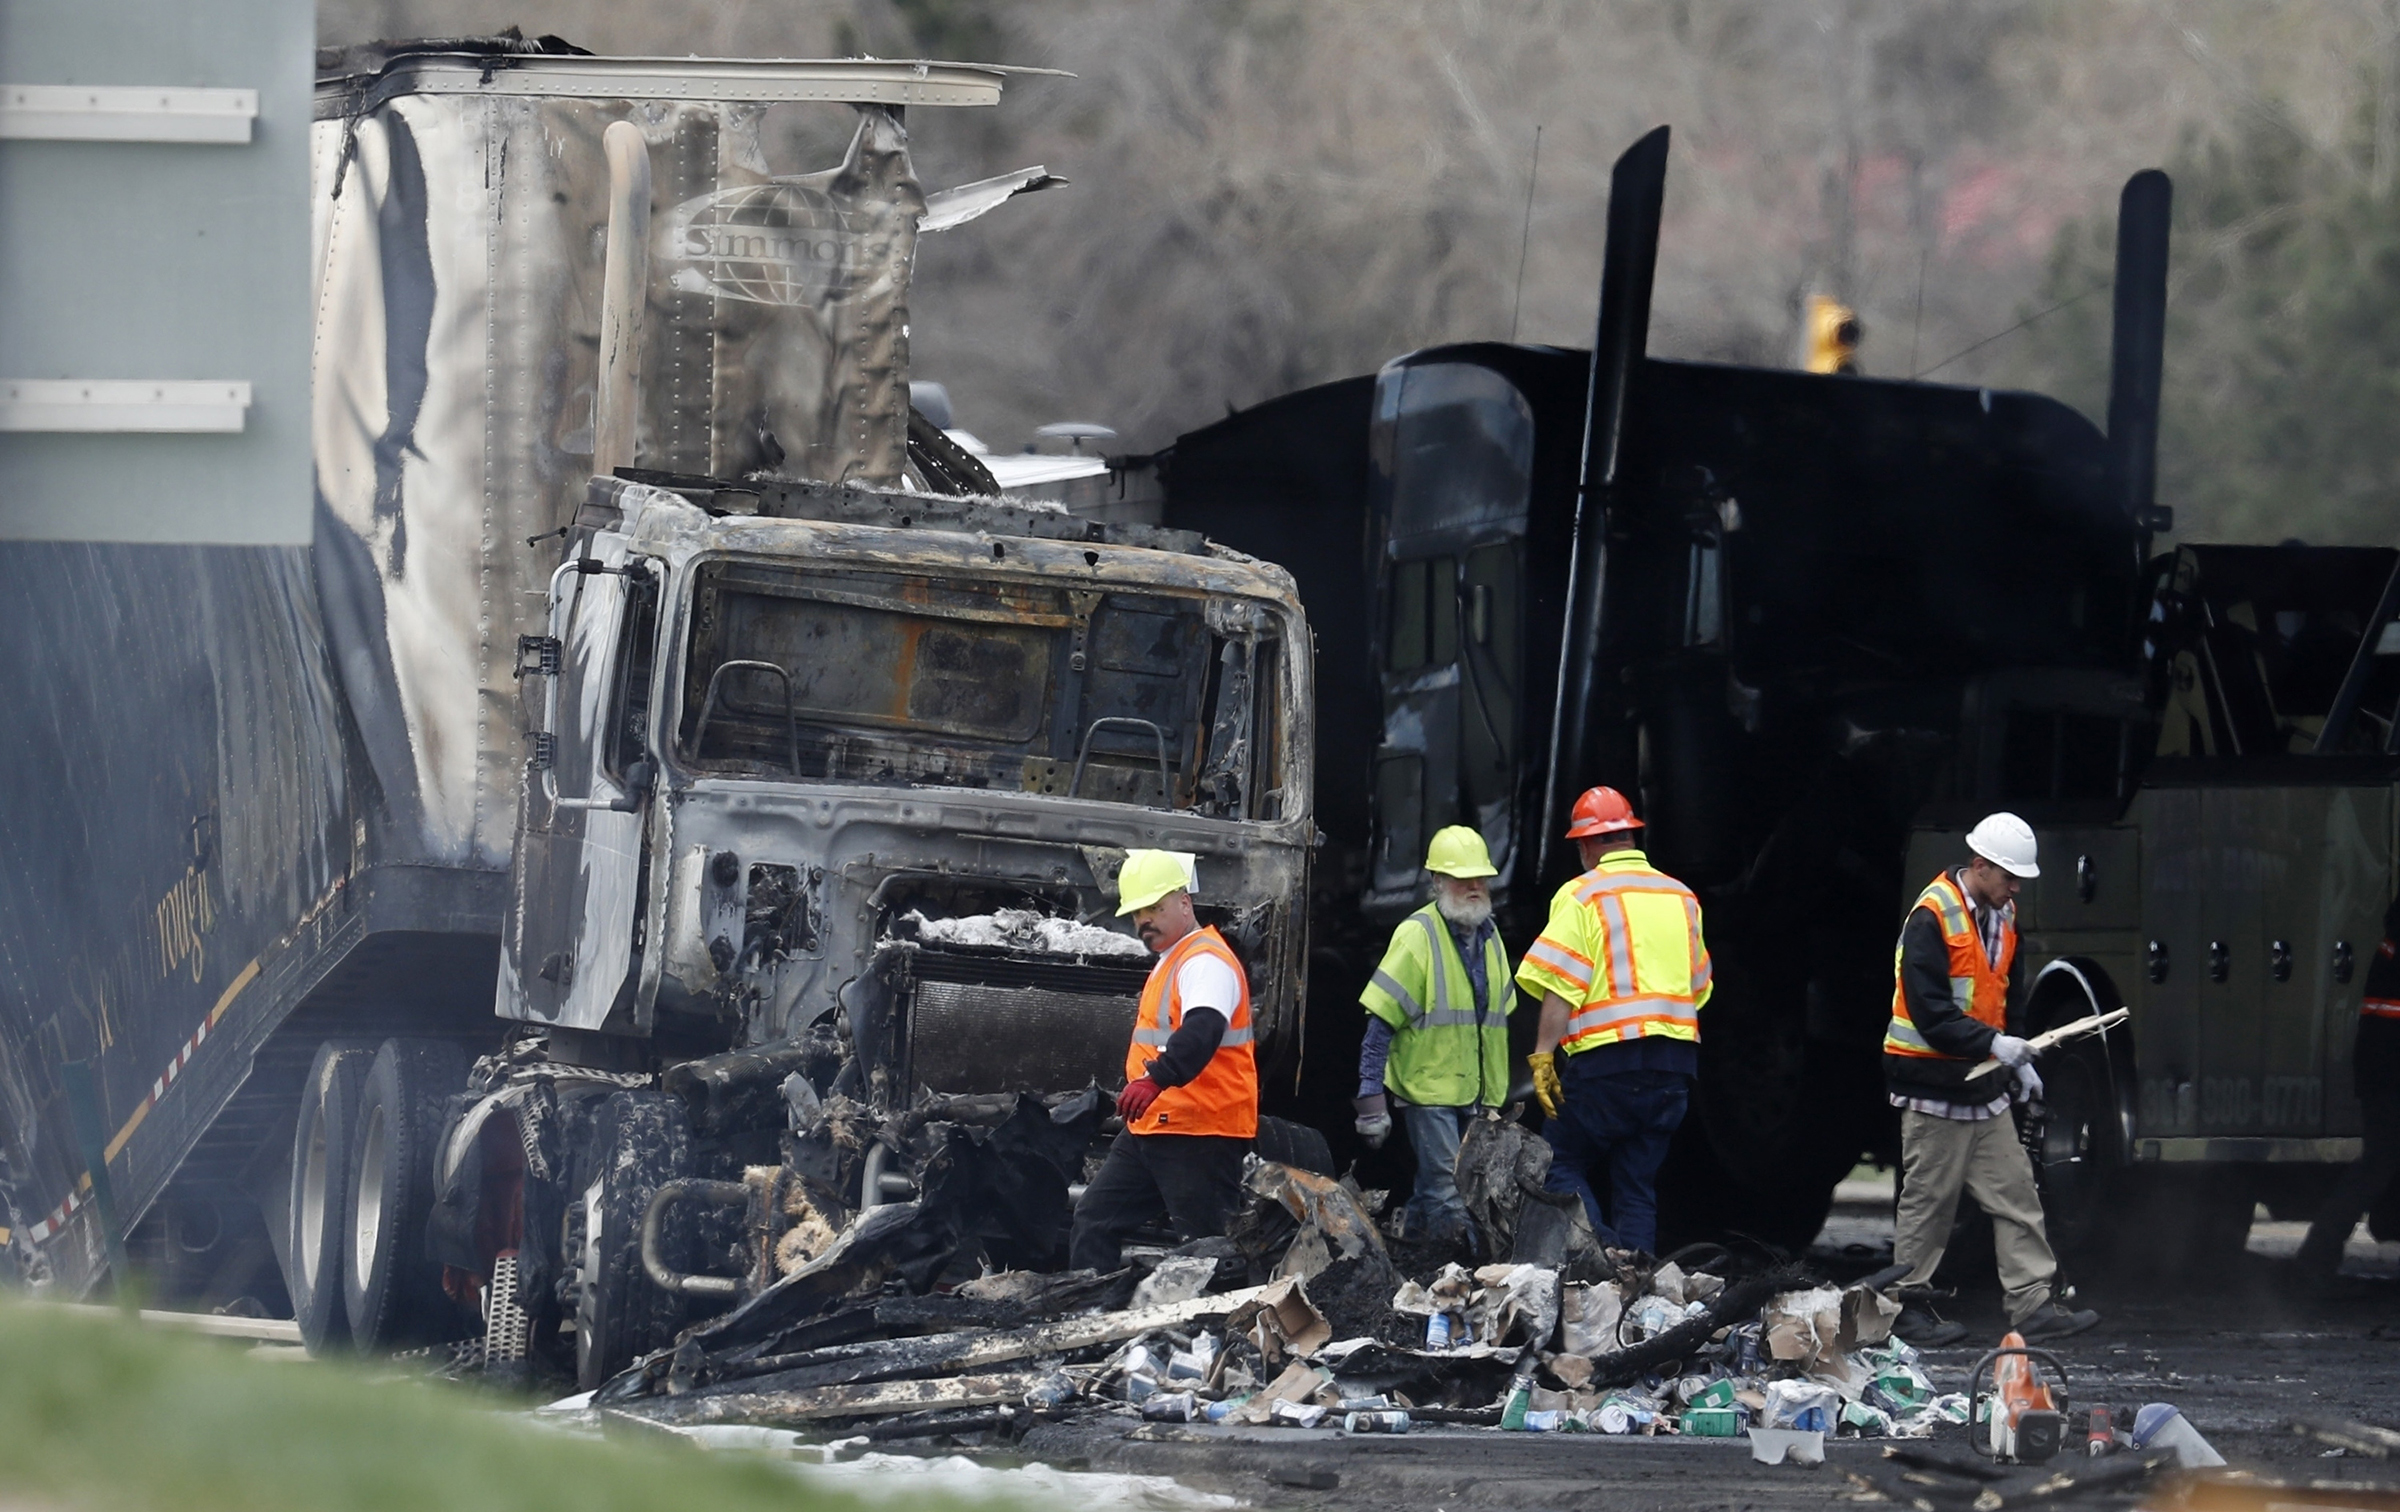 Workers clear debris from Interstate 70 on April 26, 2019, in Lakewood, Colo., following a deadly pileup involving a semi-truck hauling lumber. The truck driver who was convicted of causing the fiery pileup that killed four people said he had no experience navigating mountain roads; his 110-year sentence was later reduced to 10 years. (David Zalubowski—AP)